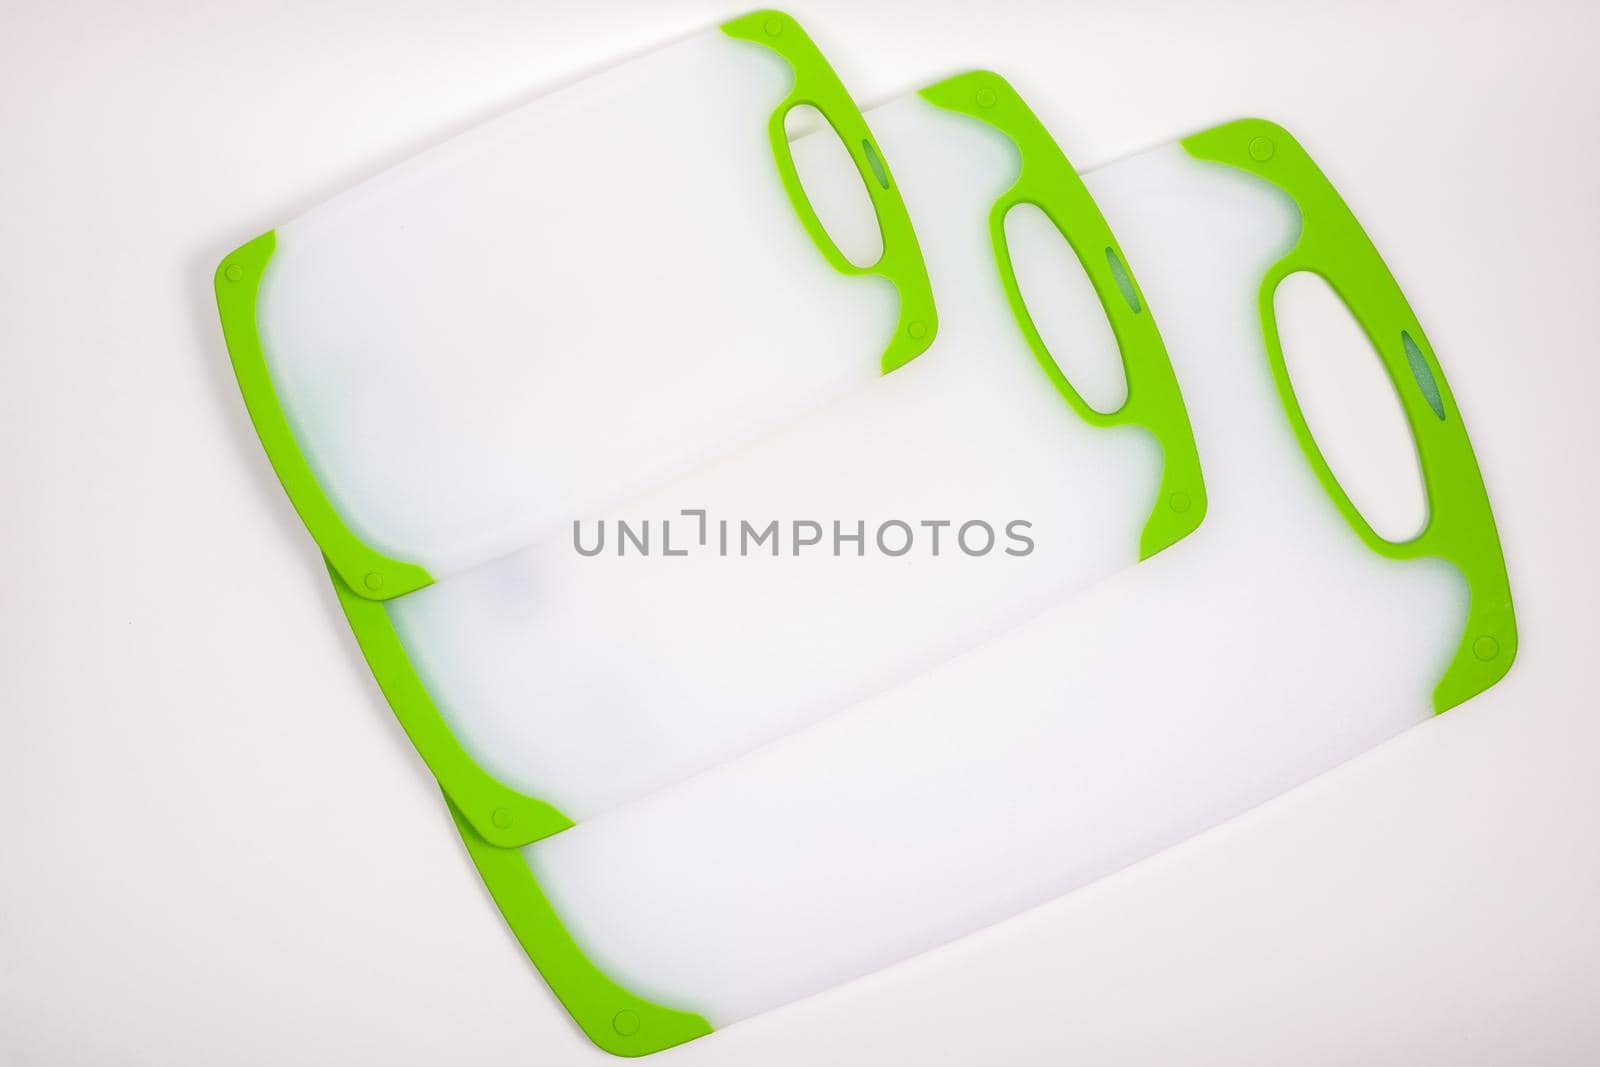 Set of white kitchen cutting boards with green handles for cooking. For cutting food, vegetables, meat, fish. Durable, professional, white plastic.